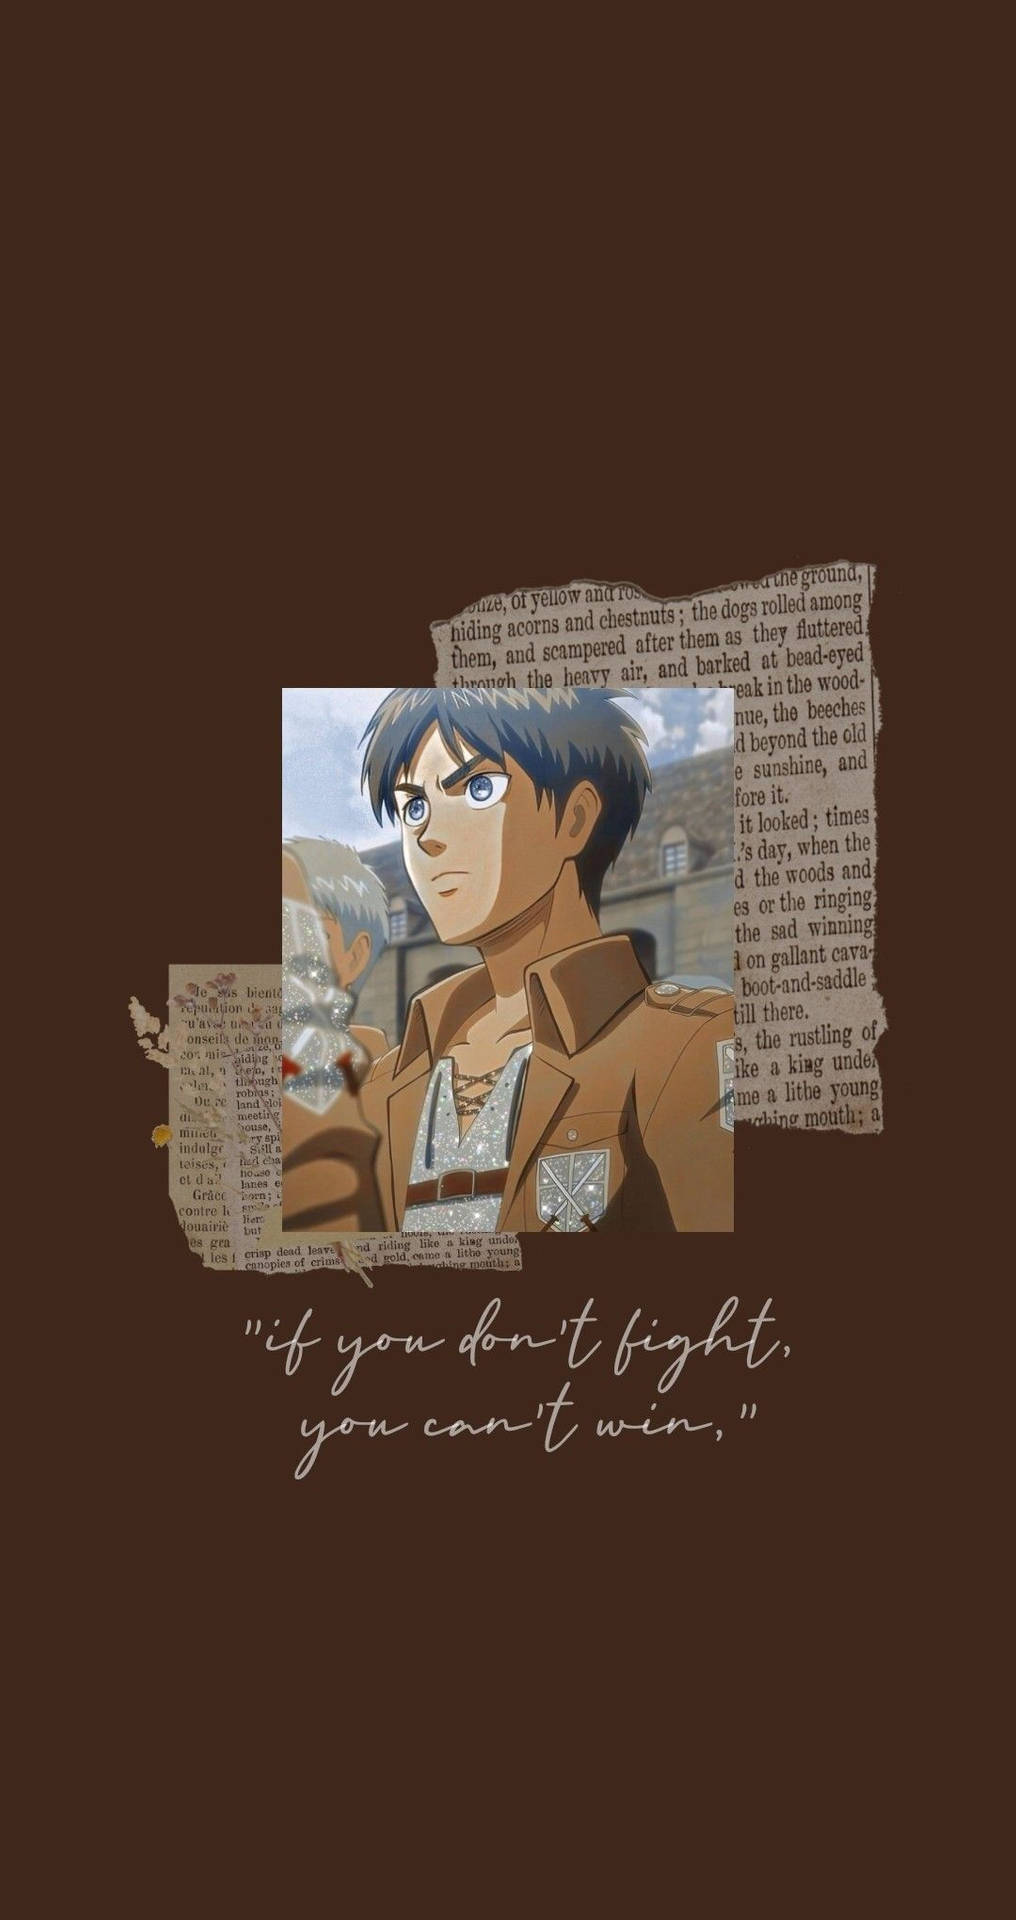 Caption: Determined Eren Yeager From Attack On Titan With Quote Wallpaper Background